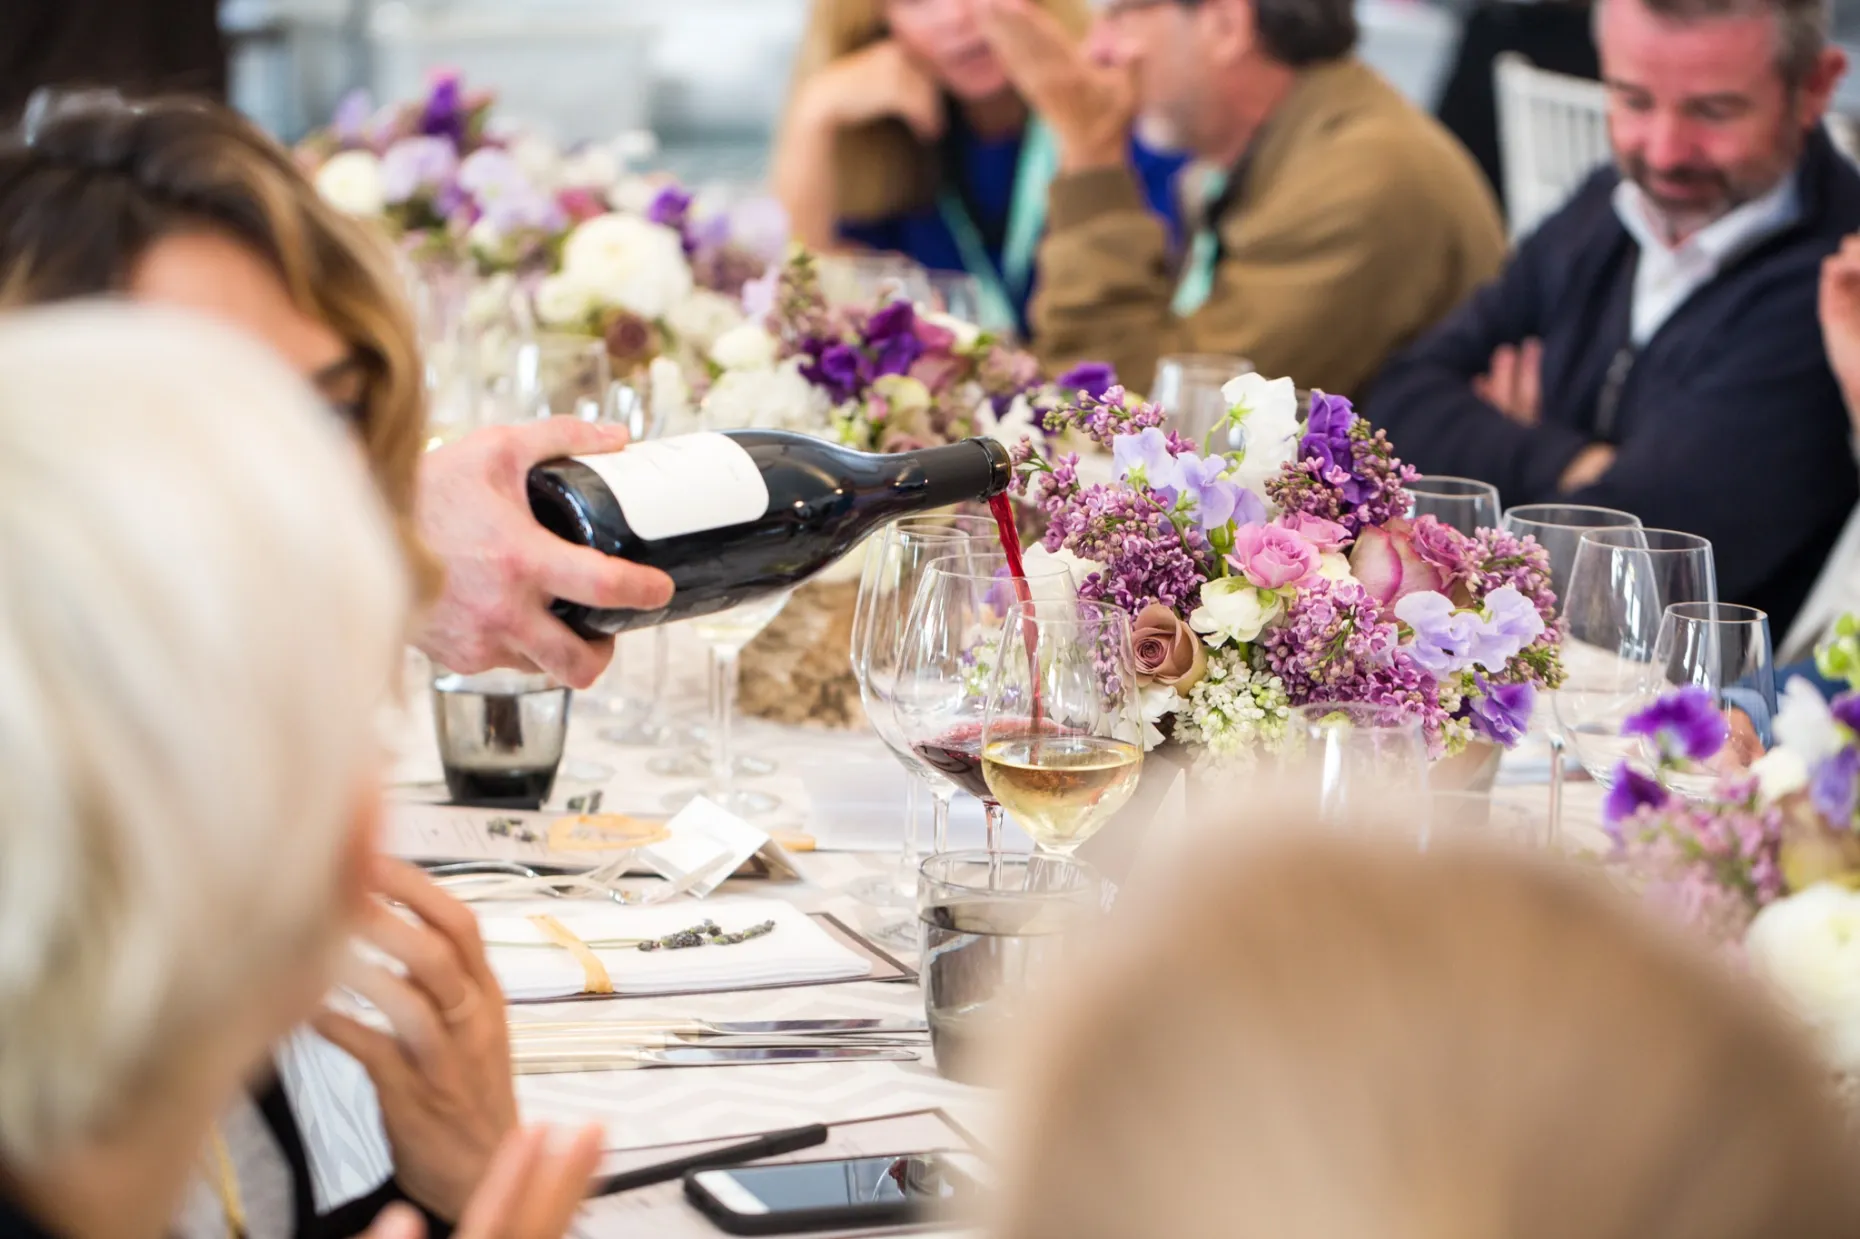 The Lexus Cut Above Lunch during the 2018 Pebble Beach Food & Wine Festival.